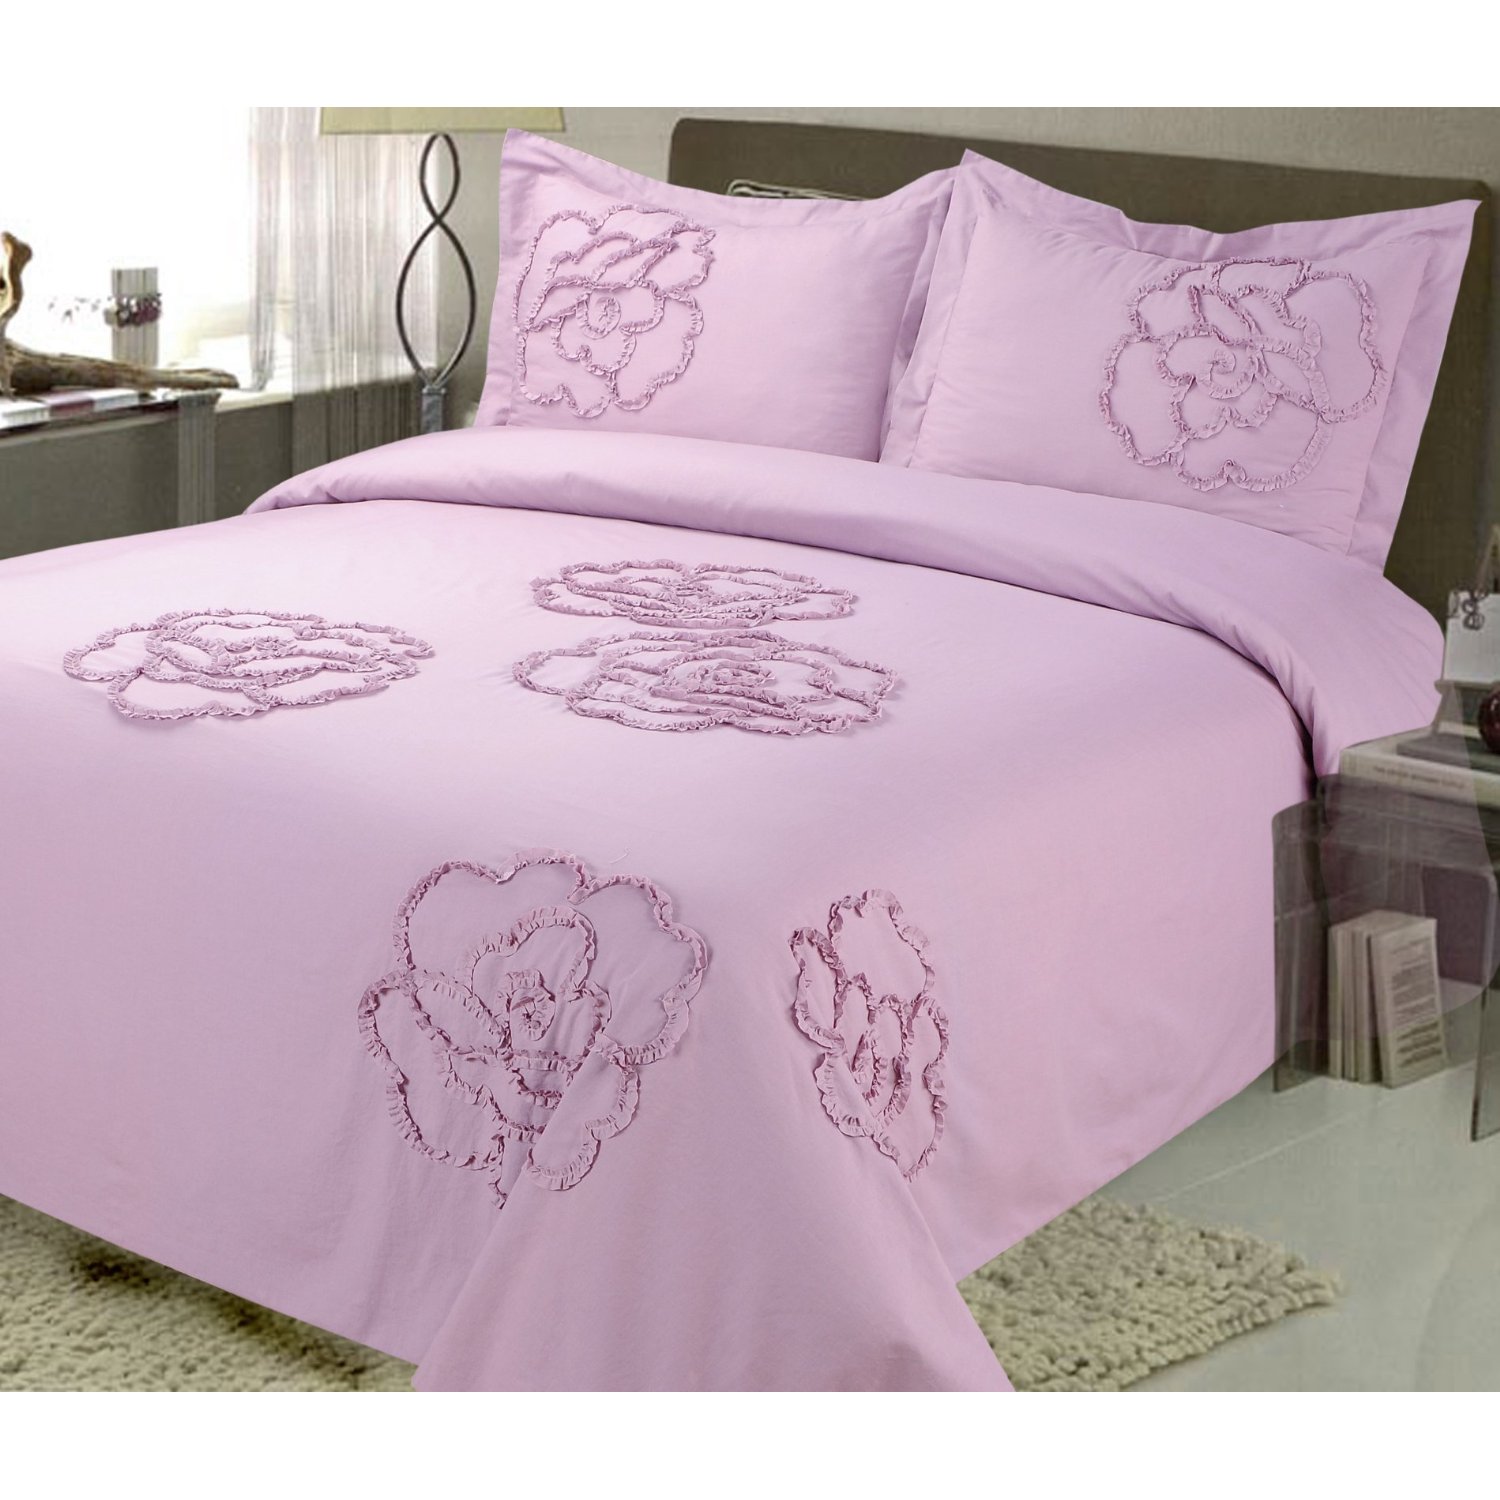 Jenny George Juno 3-Piece Duvet Cover Set with 3 Dimensional Floral Embroidery, Full/Queen